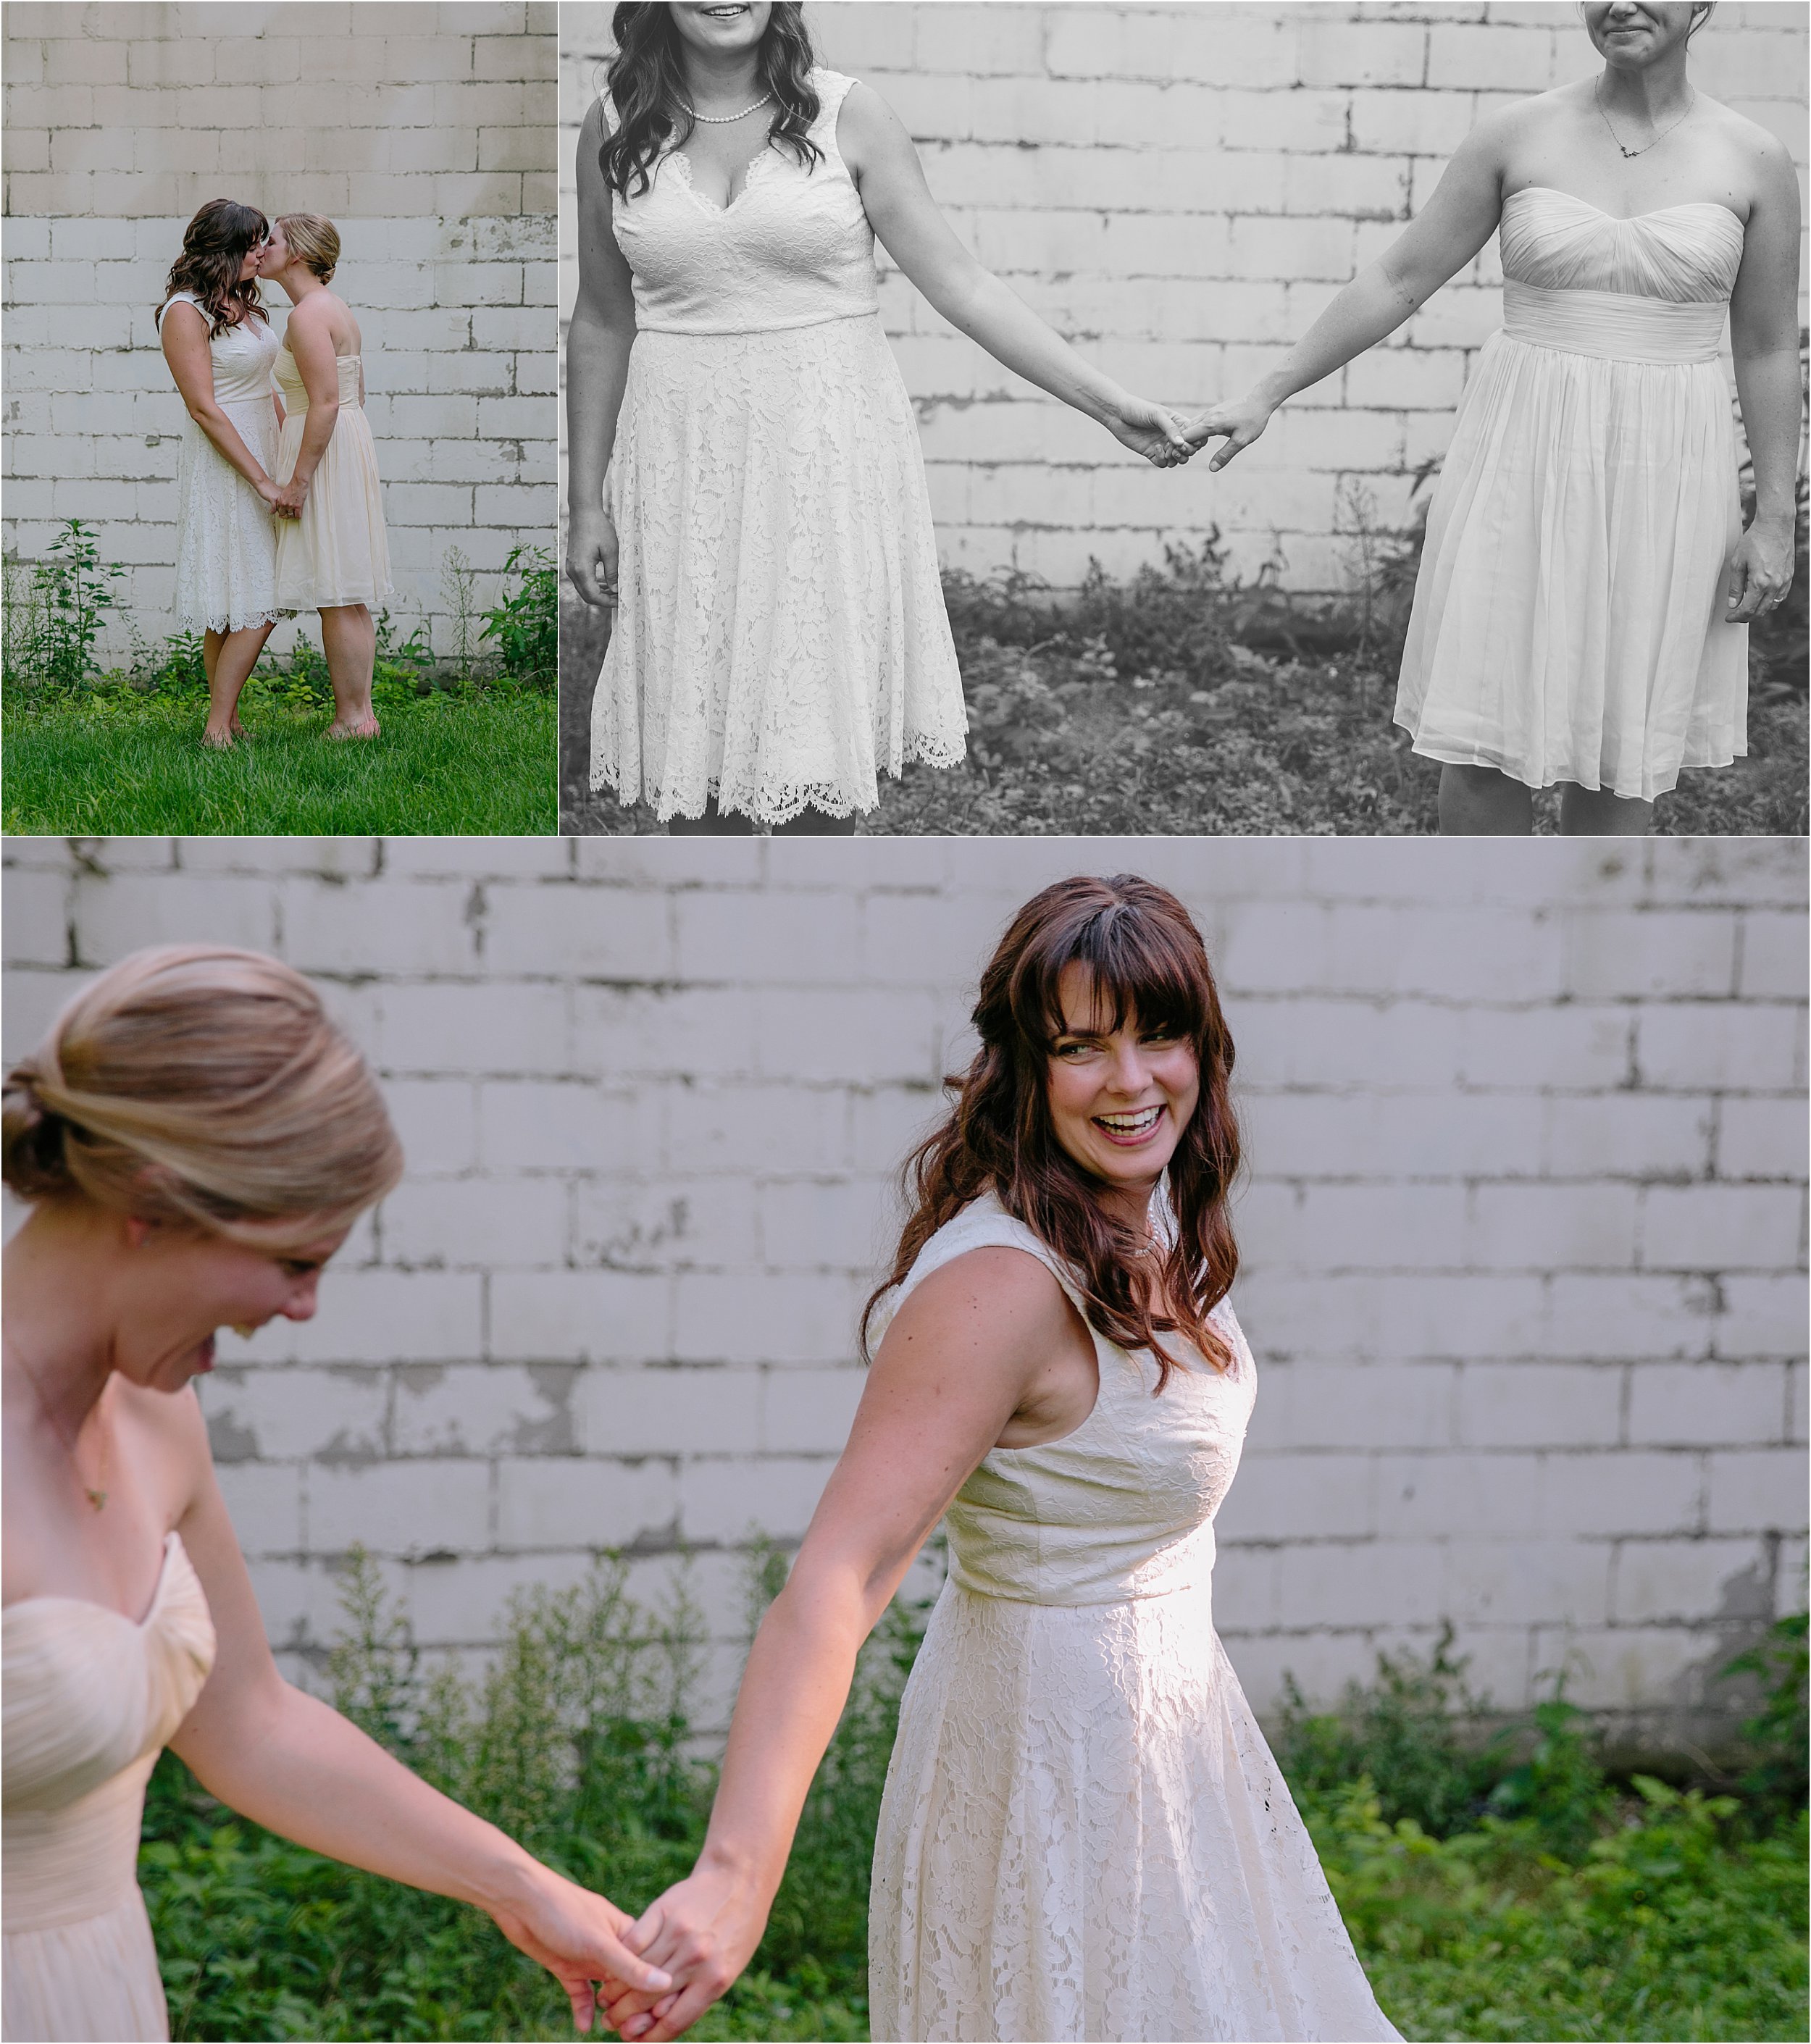 27-two-brides-outdoor-intimate-lgbtq.JPG